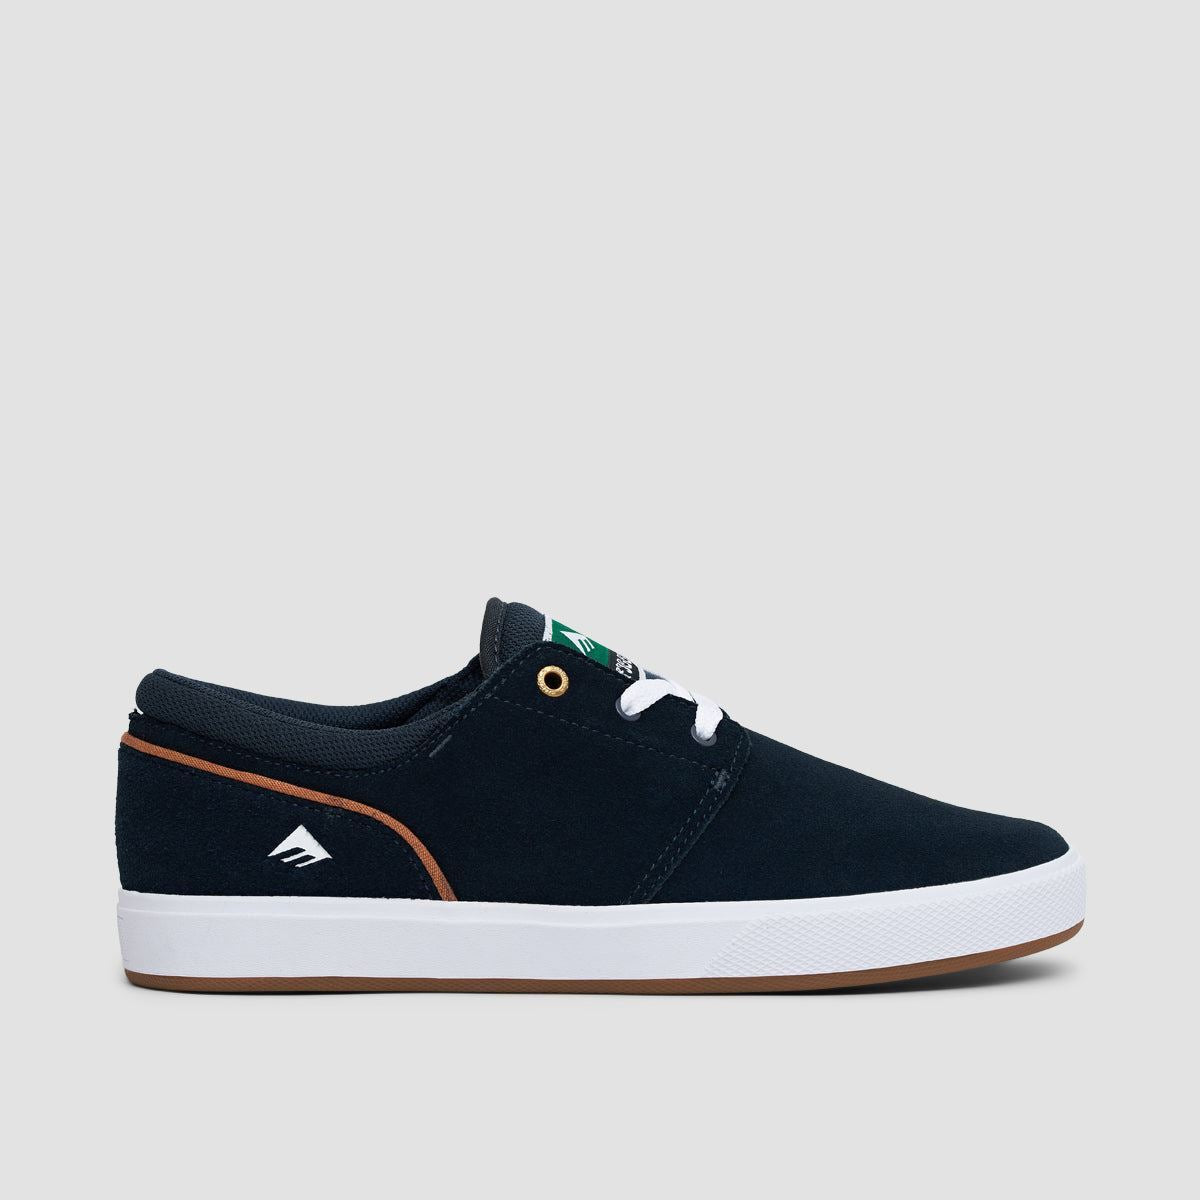 Emerica Figgy G6 Shoes - Navy